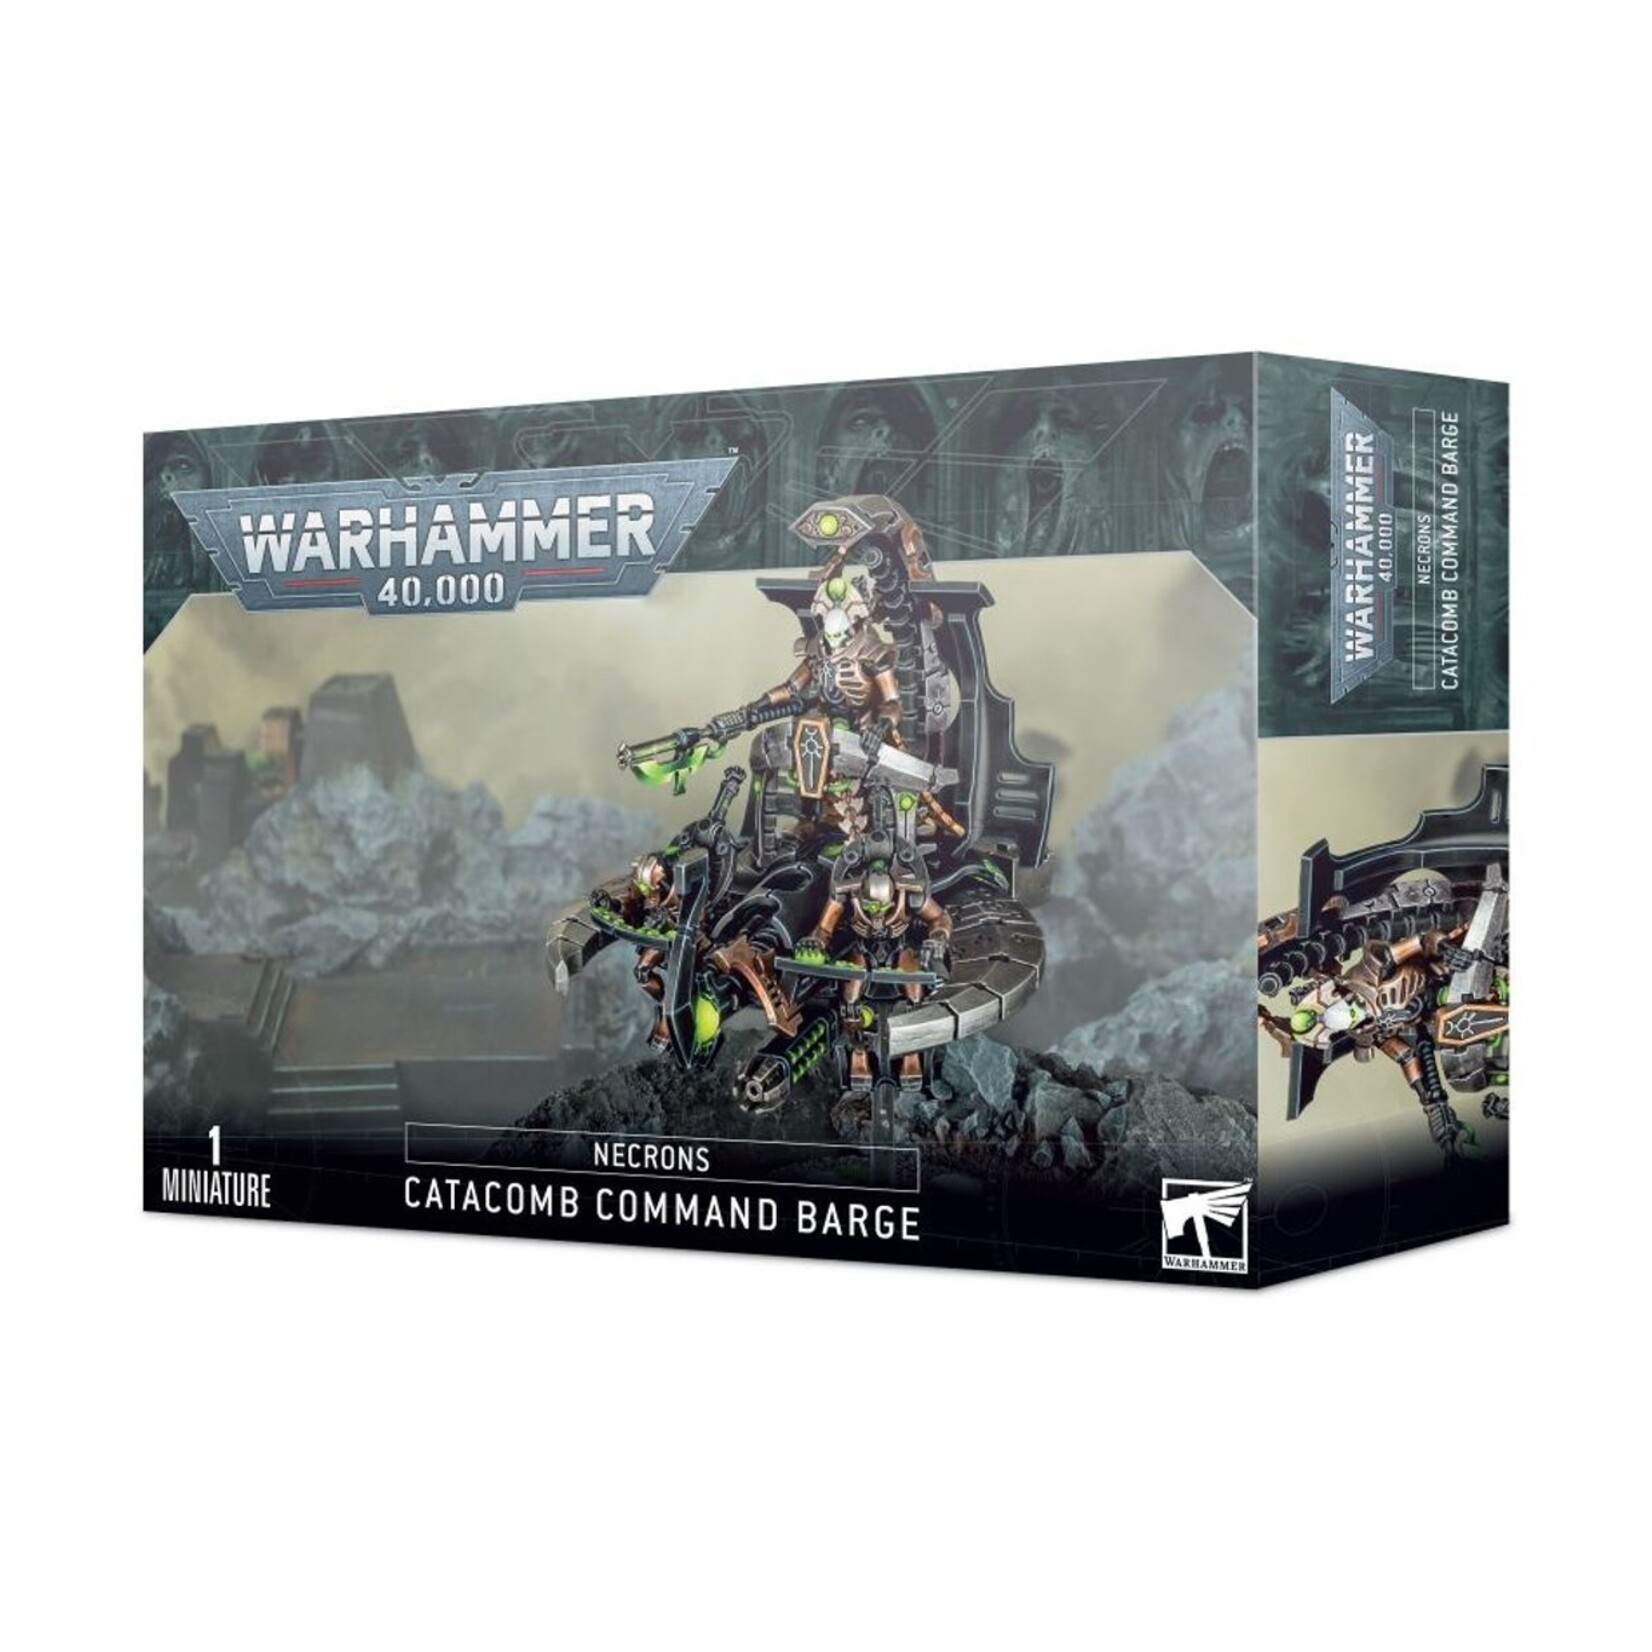 Warhammer Necrons: Catacomb Command Barge